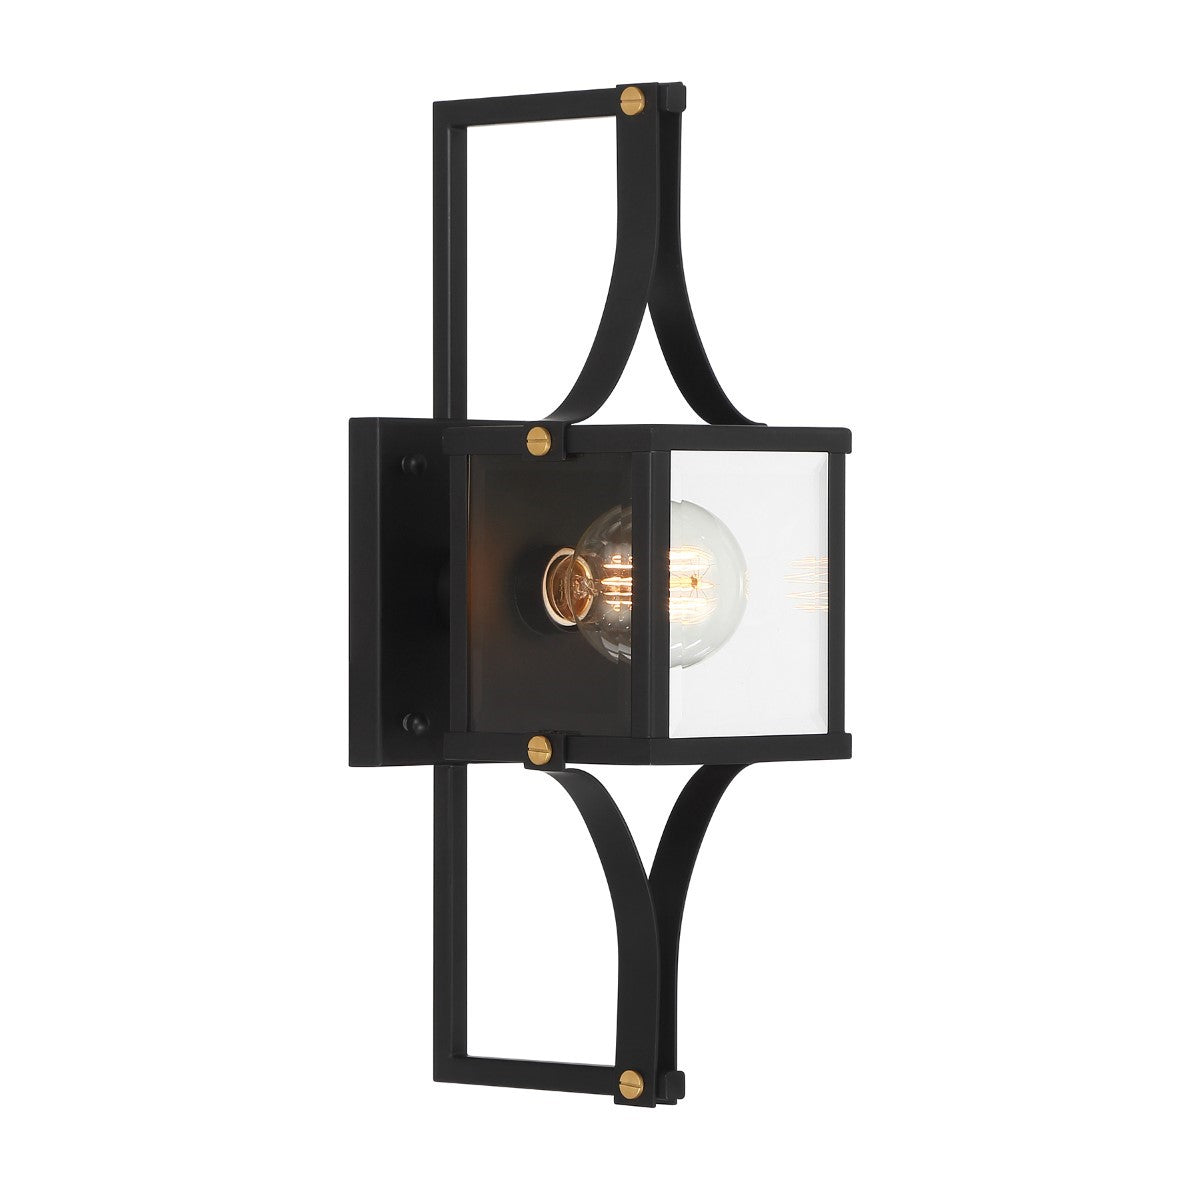 Raeburn 18 in. Outdoor Wall Lantern Matte Black and Weathered Brushed Brass Finish - Bees Lighting